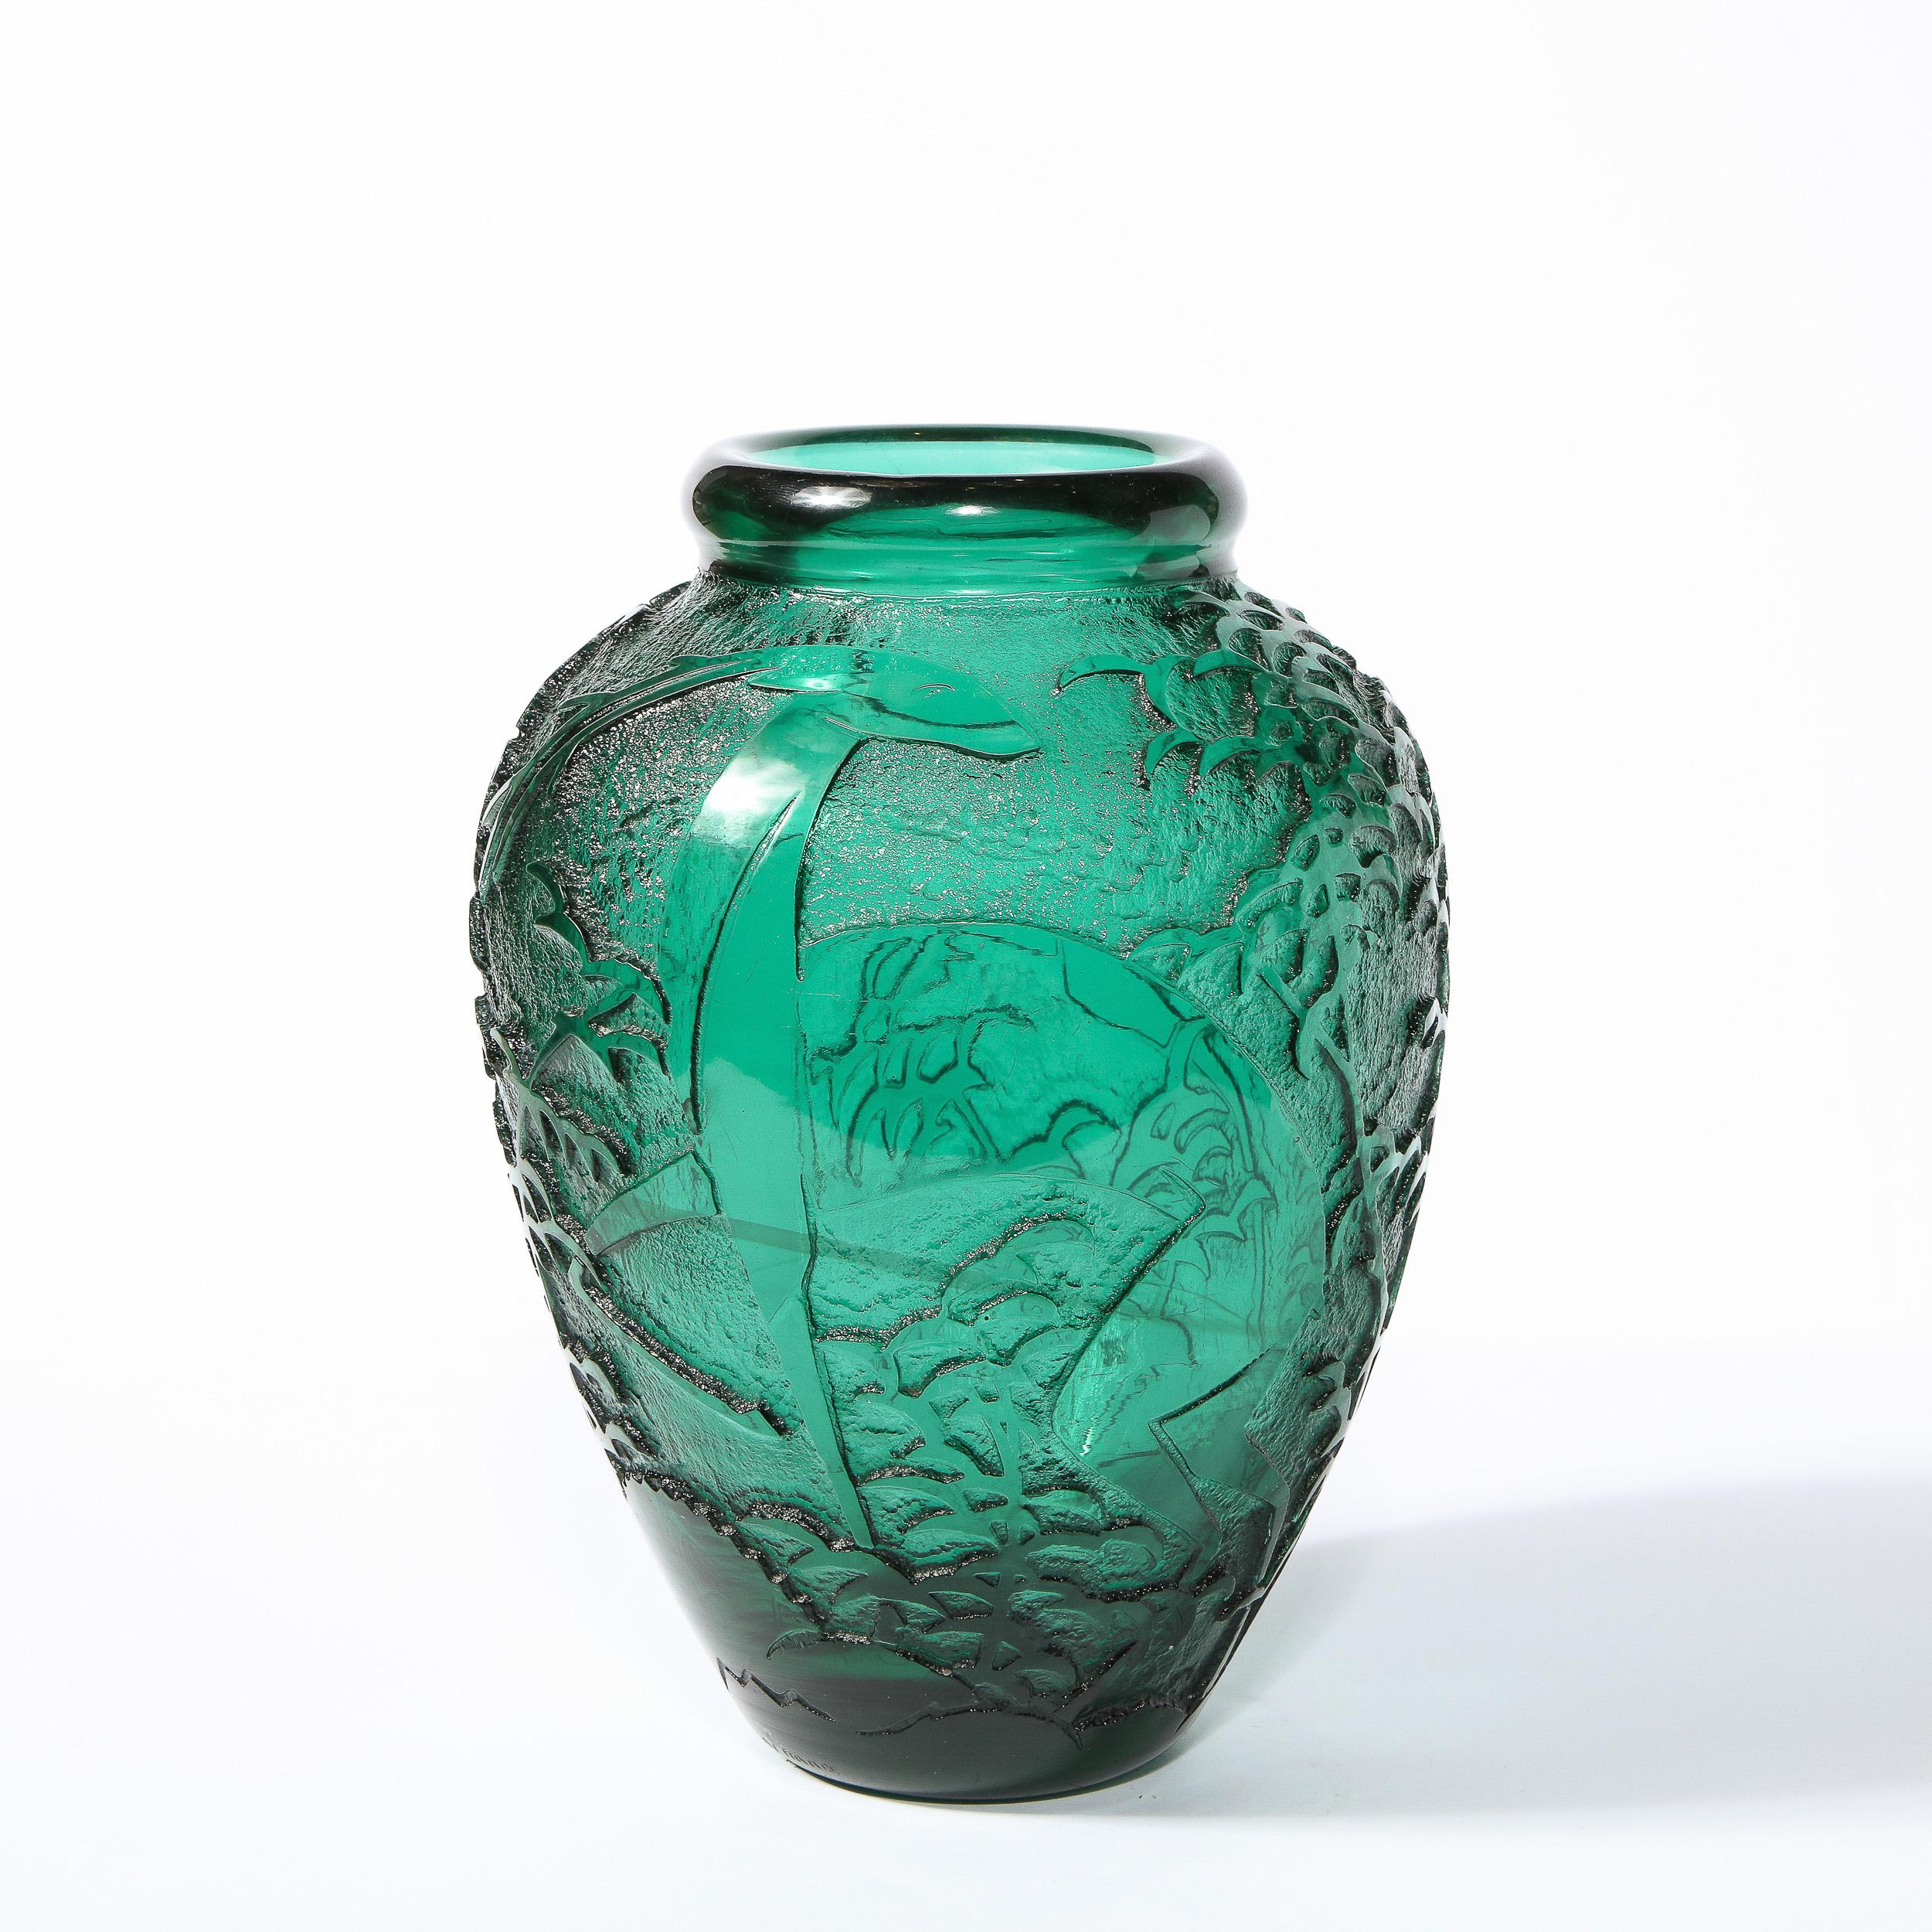 This refined Art Deco vase was realized and signed Nancy Daum in France circa 1925. It features a conical body in molded teal glass with a rounded shoulders and a raised circular mouth. Stylized ibis and repeating cloud motifs appear etched